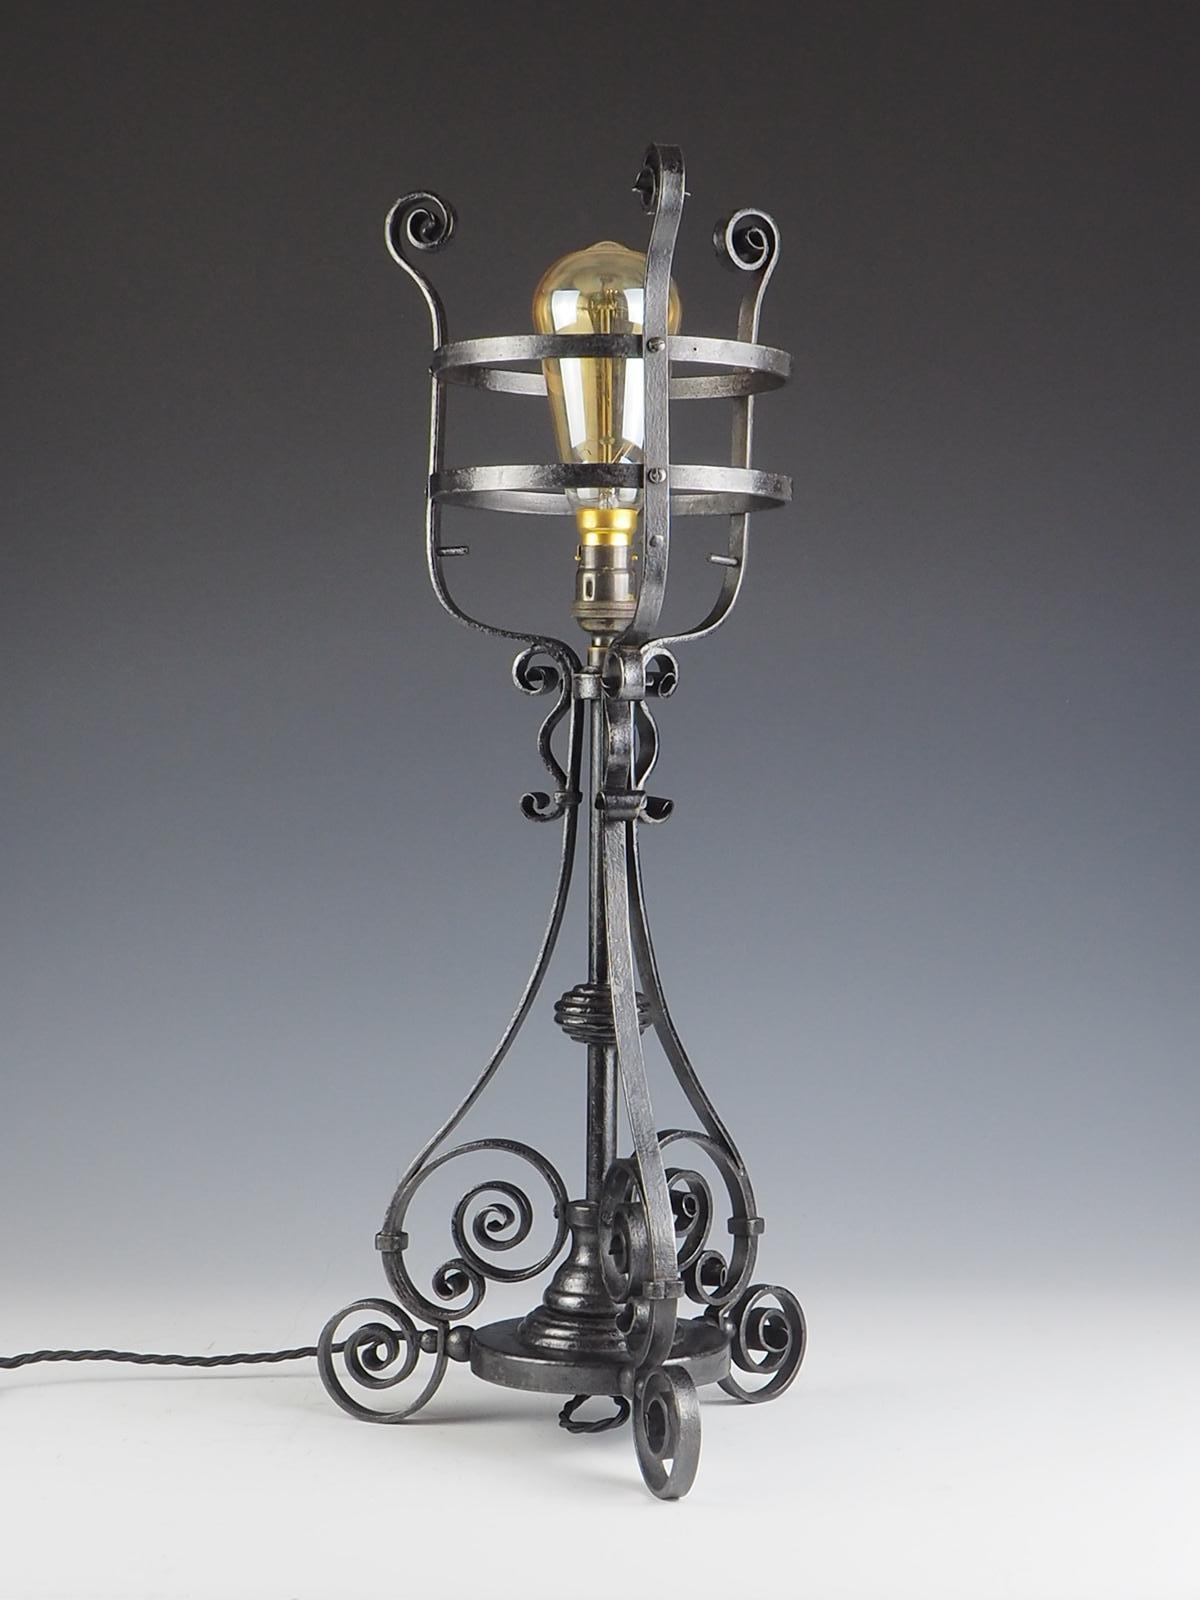 Arts & Crafts Wrought Iron Table Lamp

Beautiful hand fordged country house lamp with ornate scroll detail and stunning light behind enclosed wrought iron frame

Very well made, each scroll widens to the end which gives it a unique